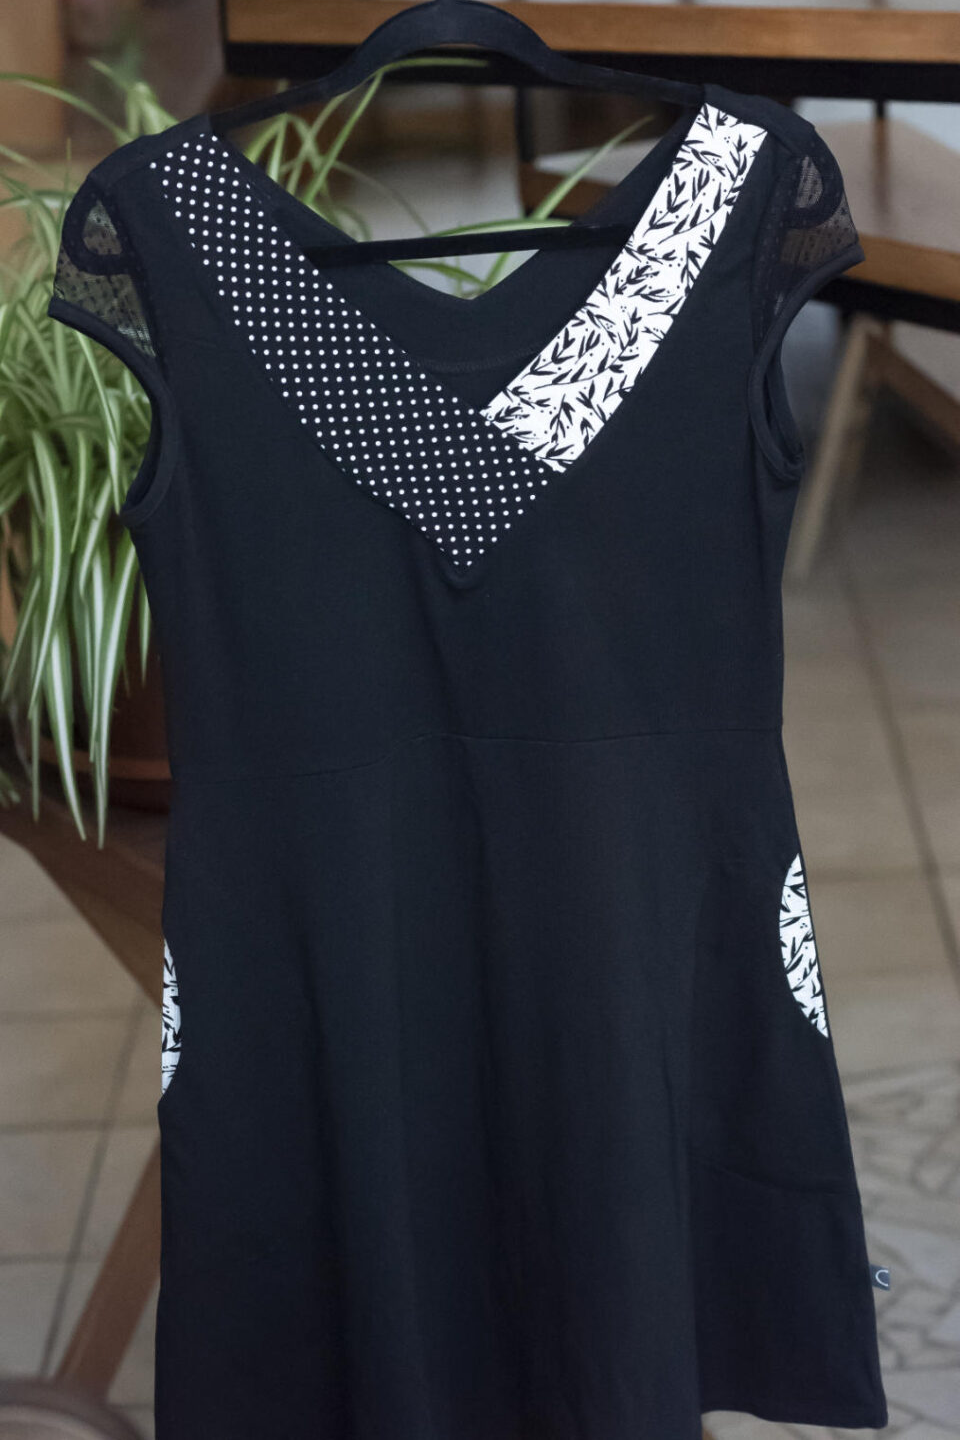 Maya Dress by Marie C, Black, V-neck, patterned fabric panels at neckline, dotted mesh cap sleeves, fit and flare shape, above the knee, pockets, eco-fabric, Tencel, organic cotton, sizes XS to XL, made in Montreal 